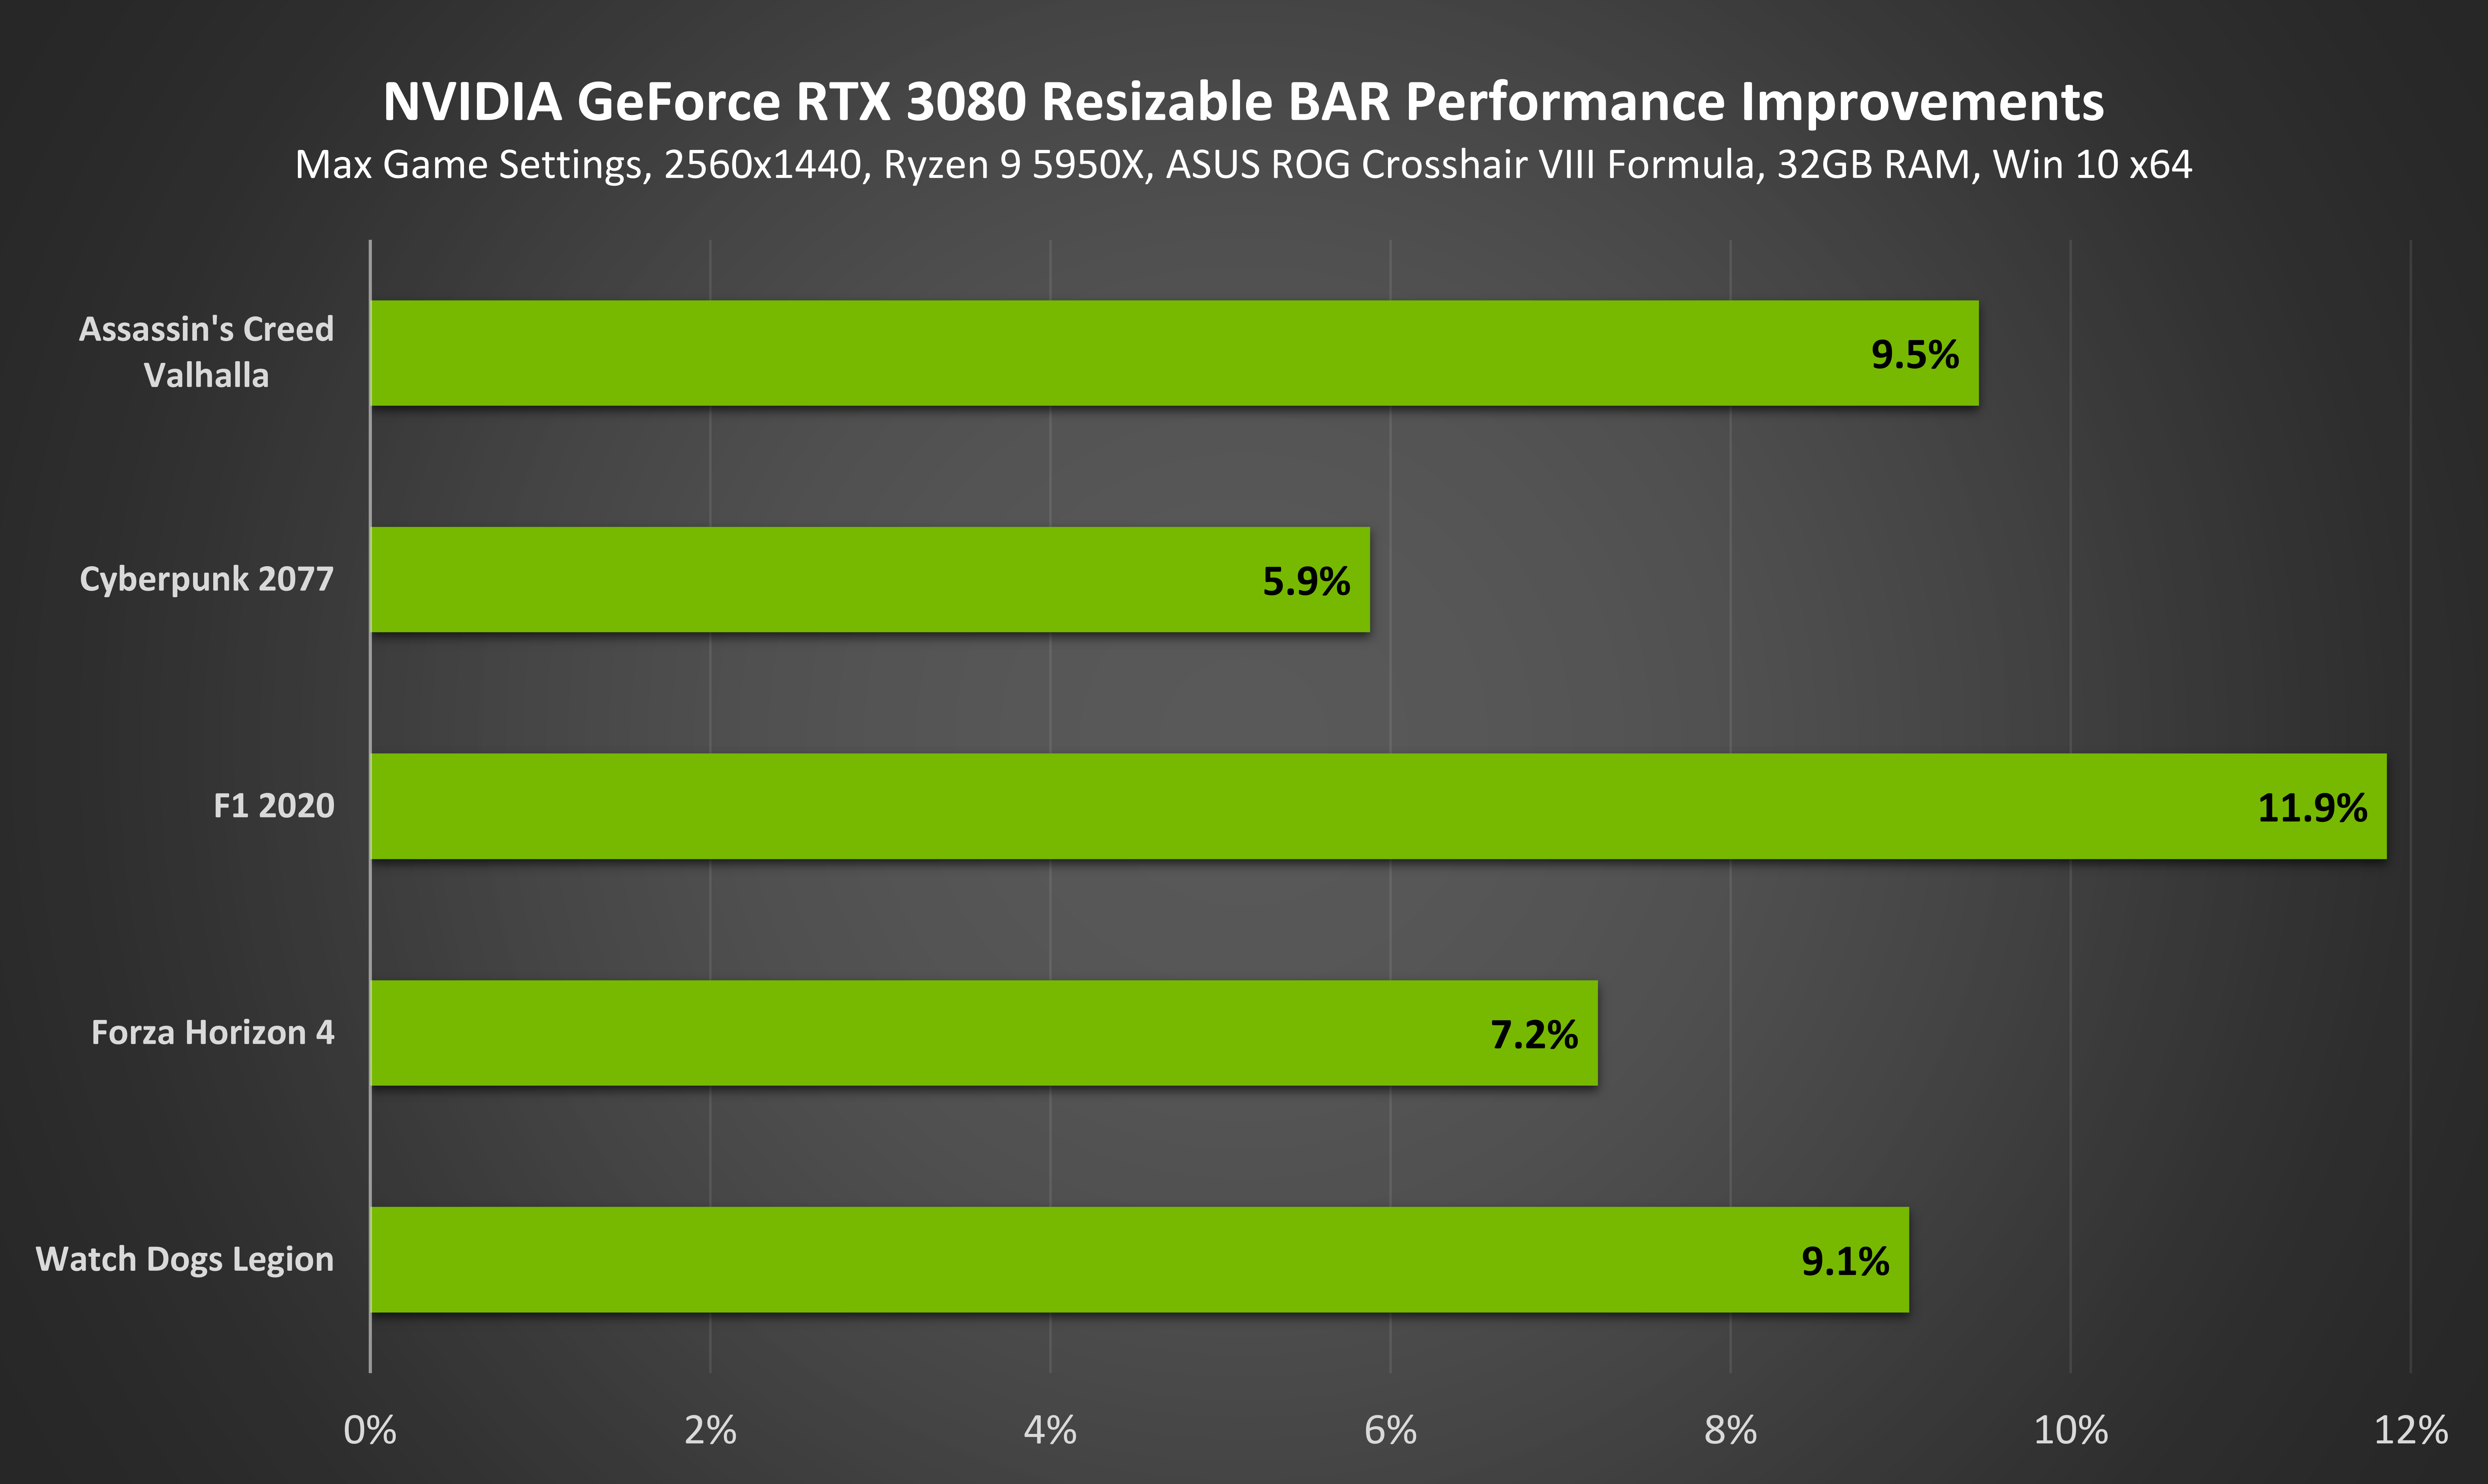 Galax Geforce RTX 4090 is Mine Now - Sometimes I Play Games